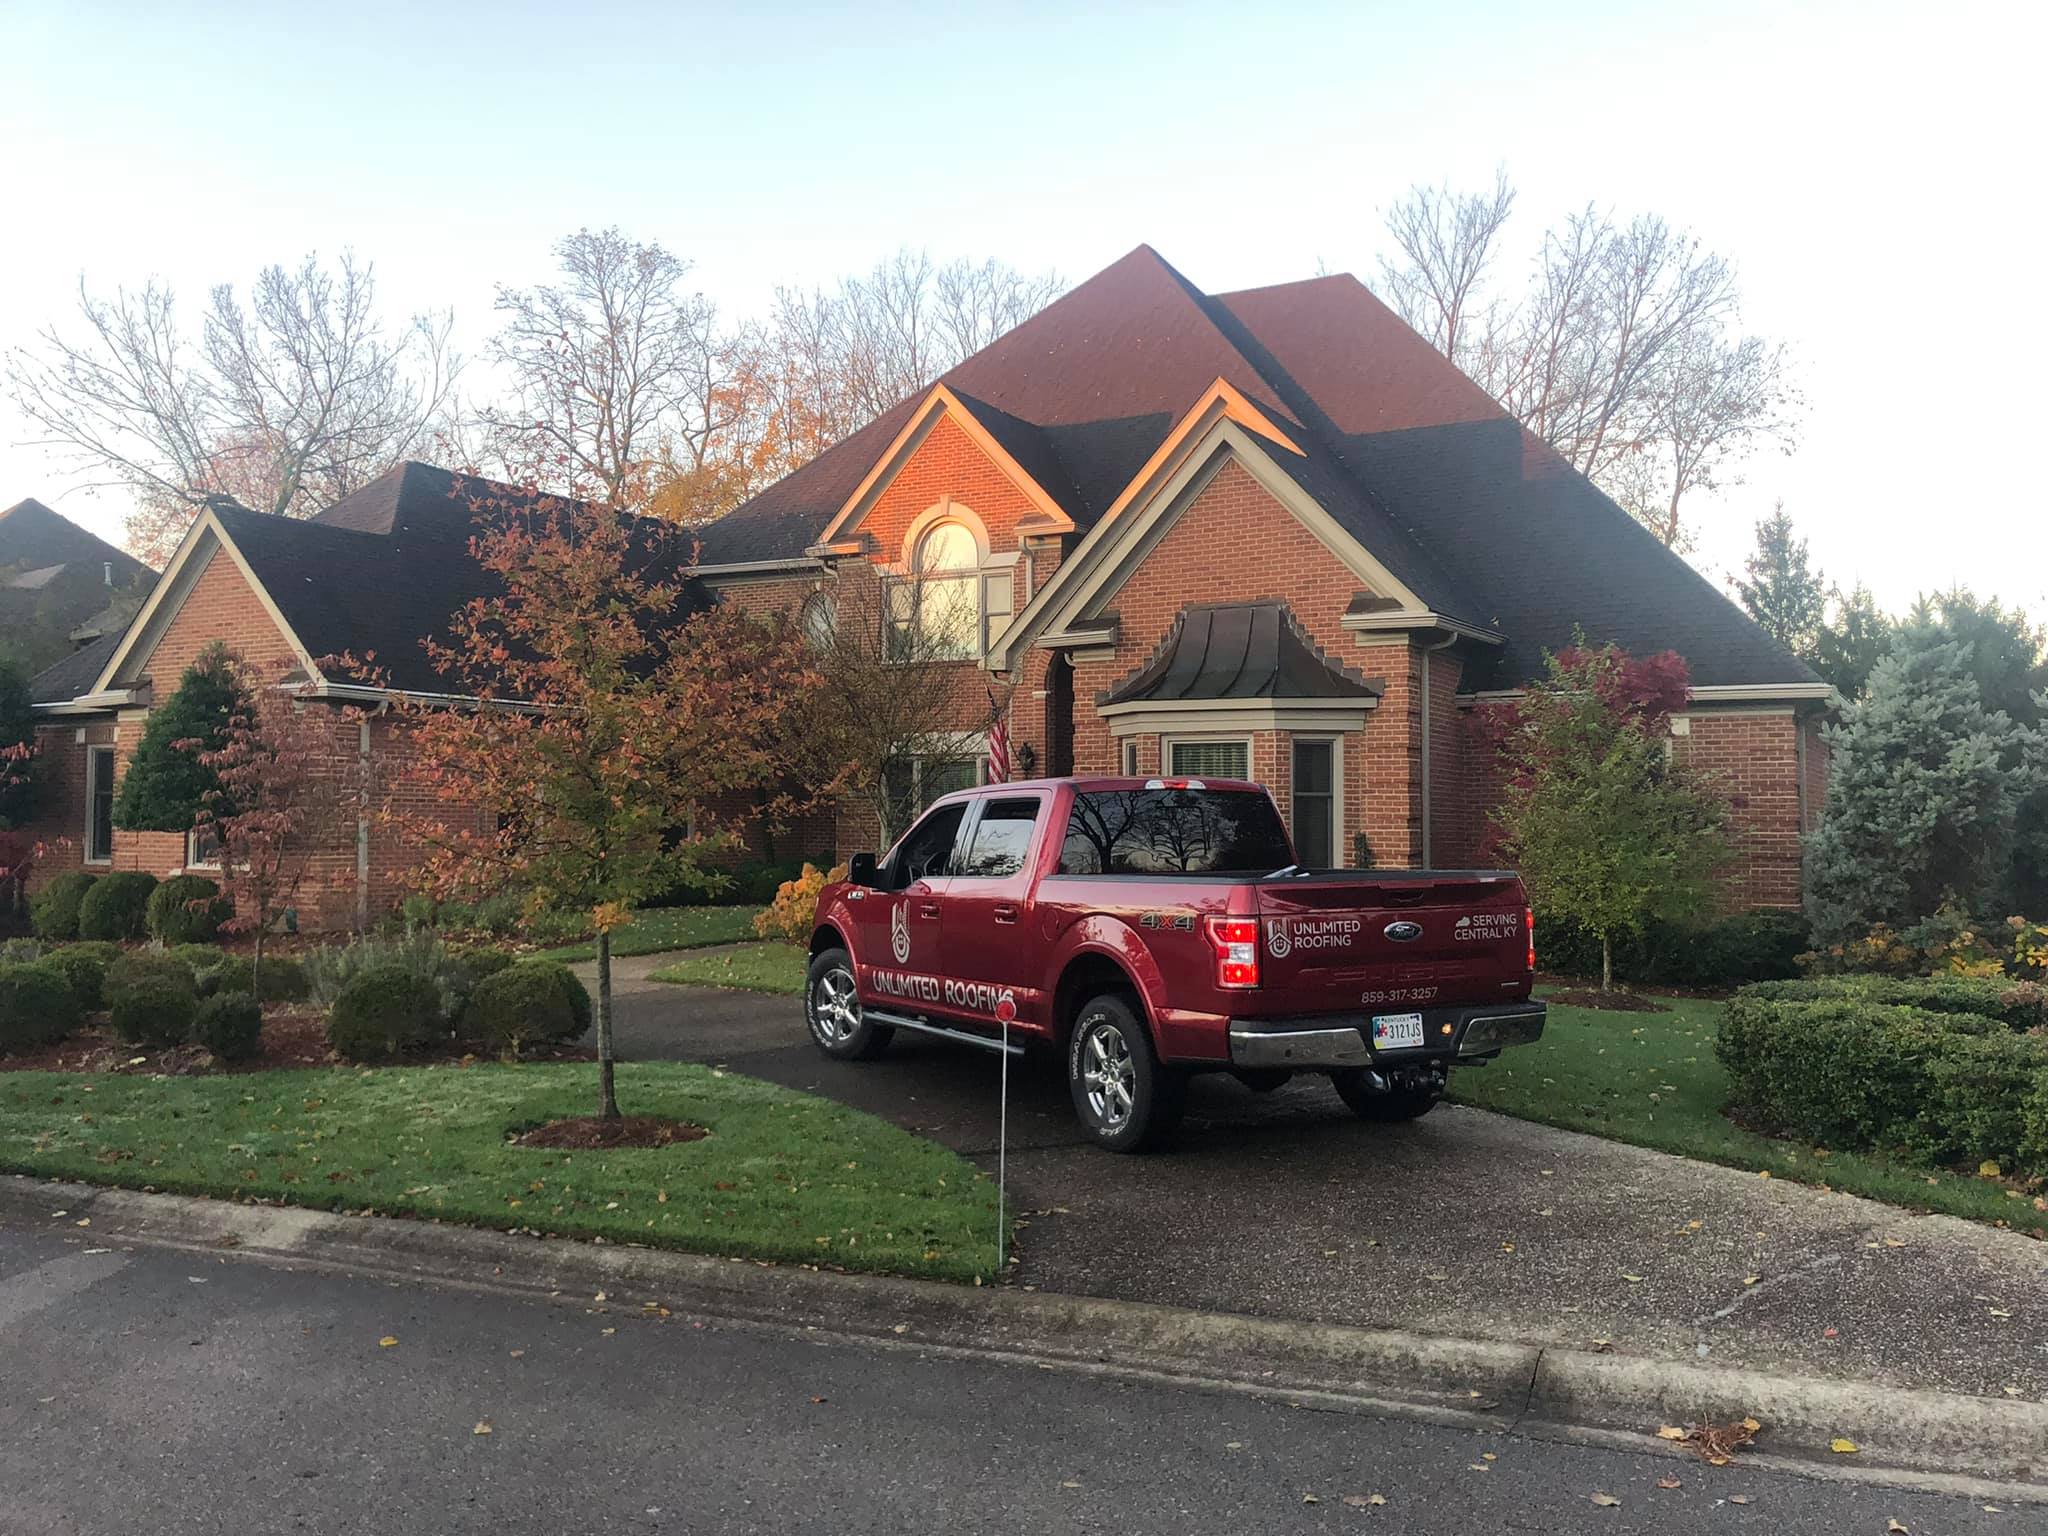 Insured Roofing Contractor - Red Truck in Driveway of Nice Home with New Roof